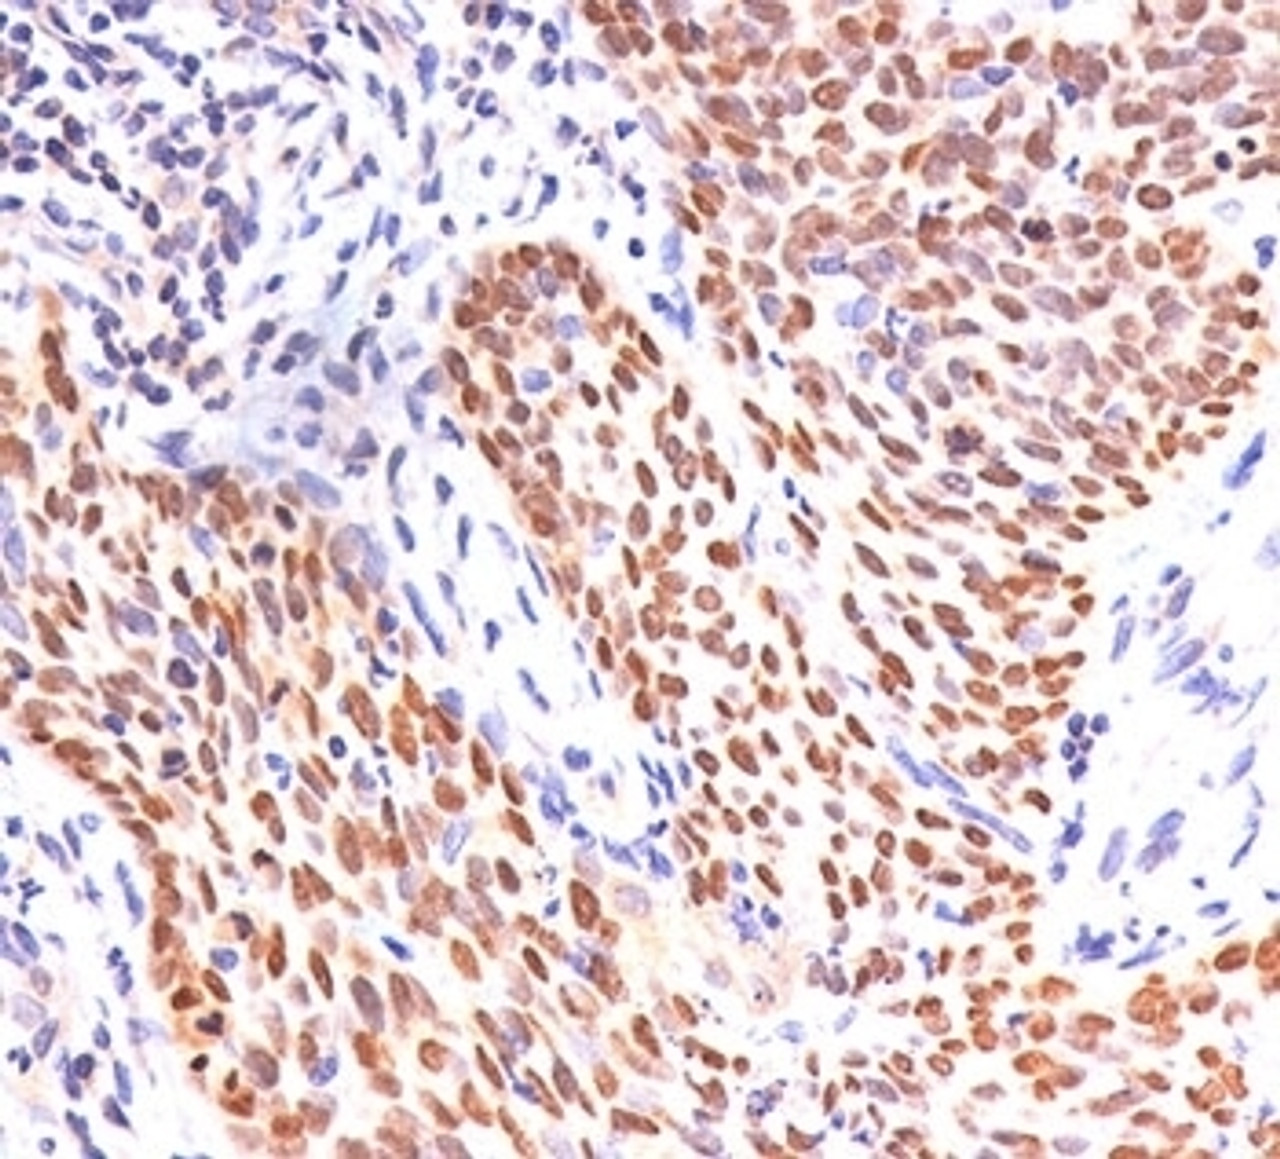 IHC staining of lung squamous cell carcinoma with p40 antibody.